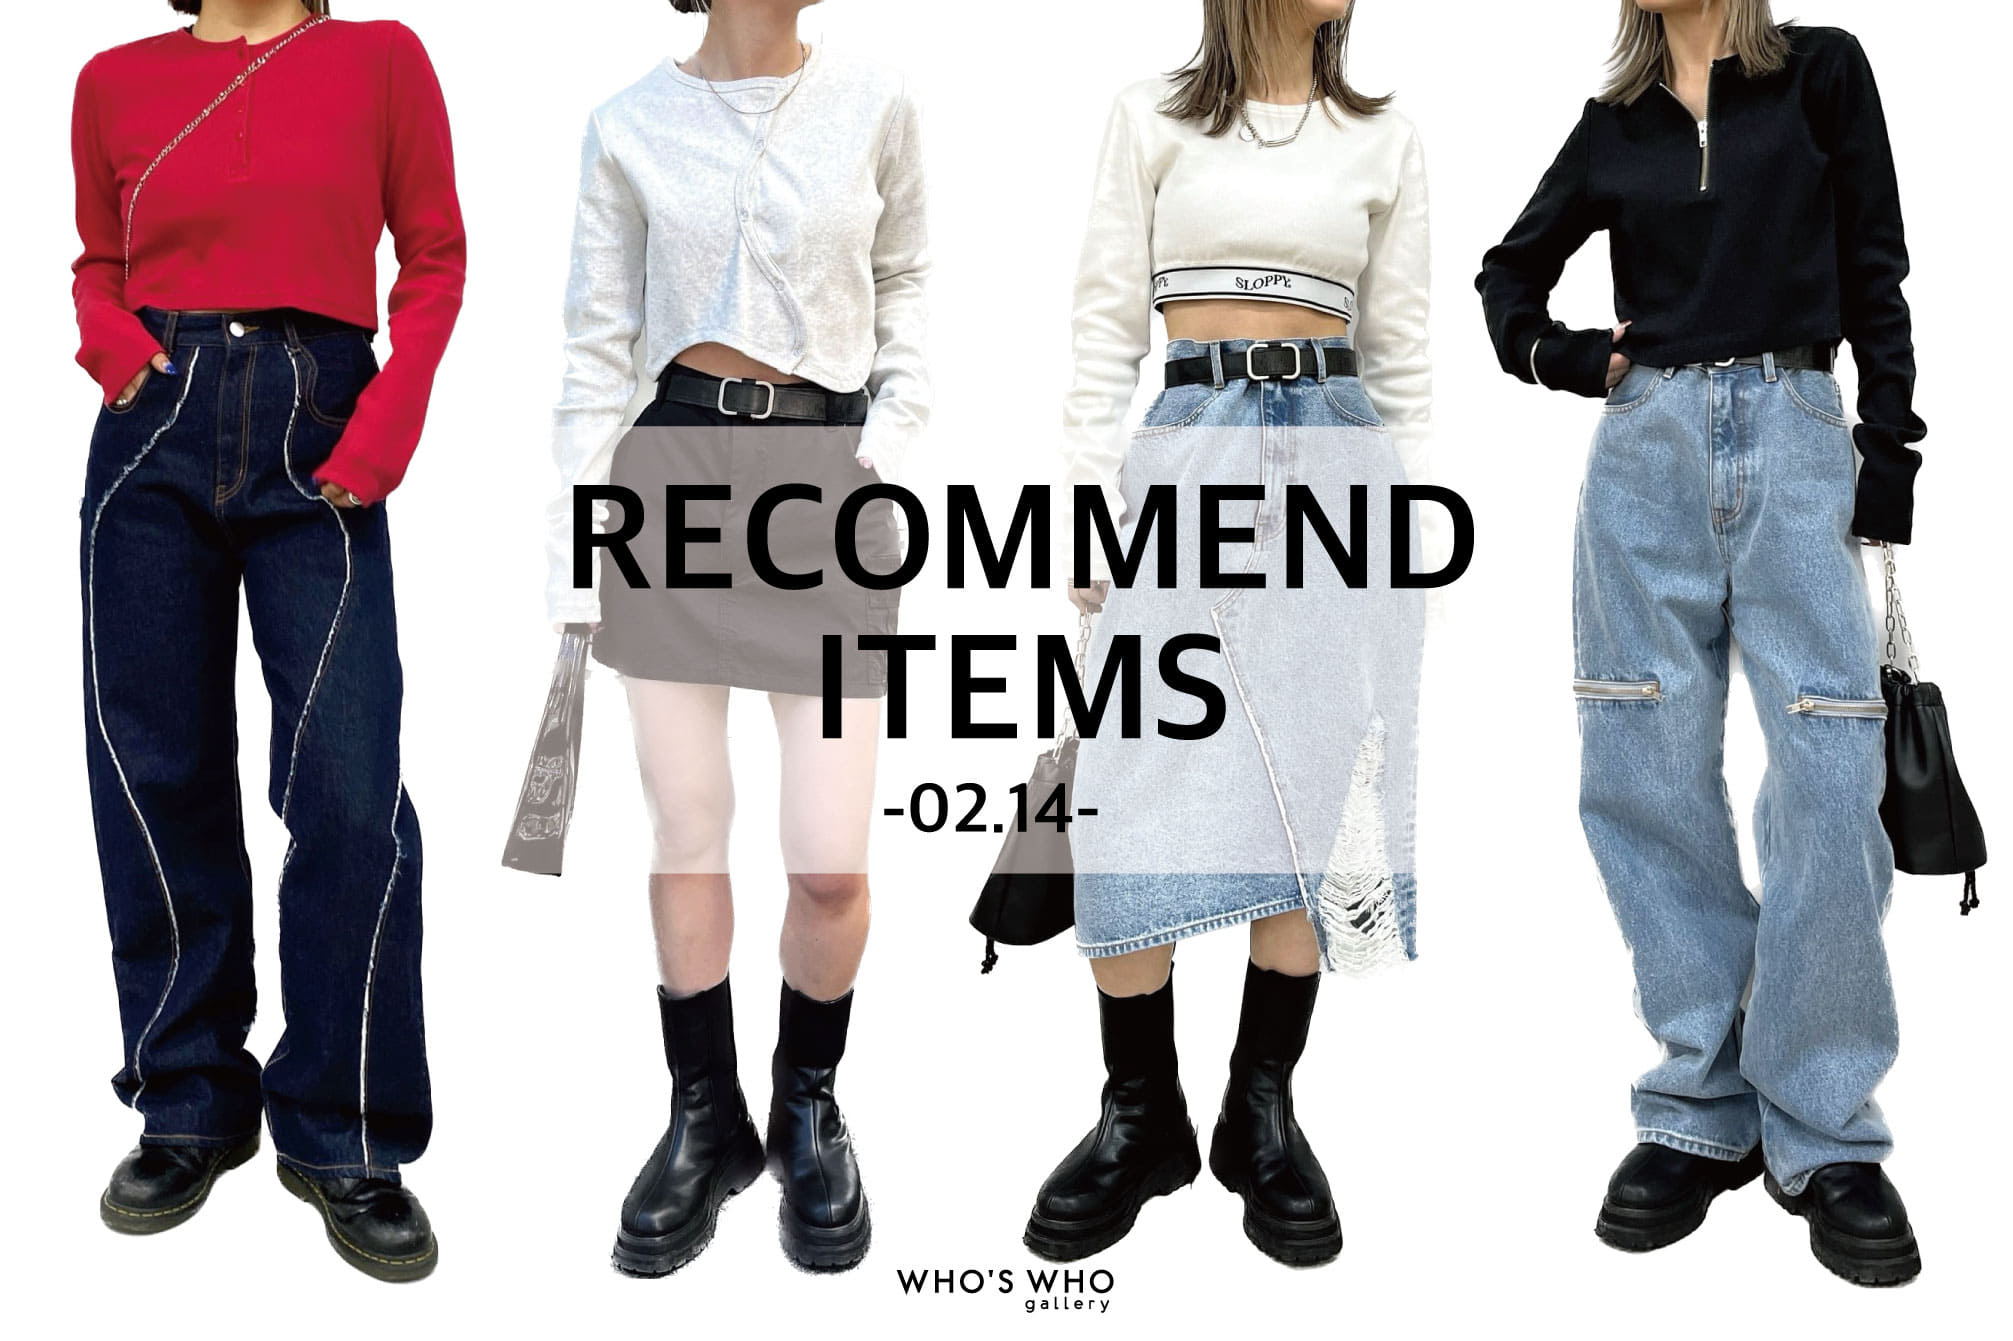 WHO’S WHO gallery 【RECCOMEND ITEMS -02.14-】